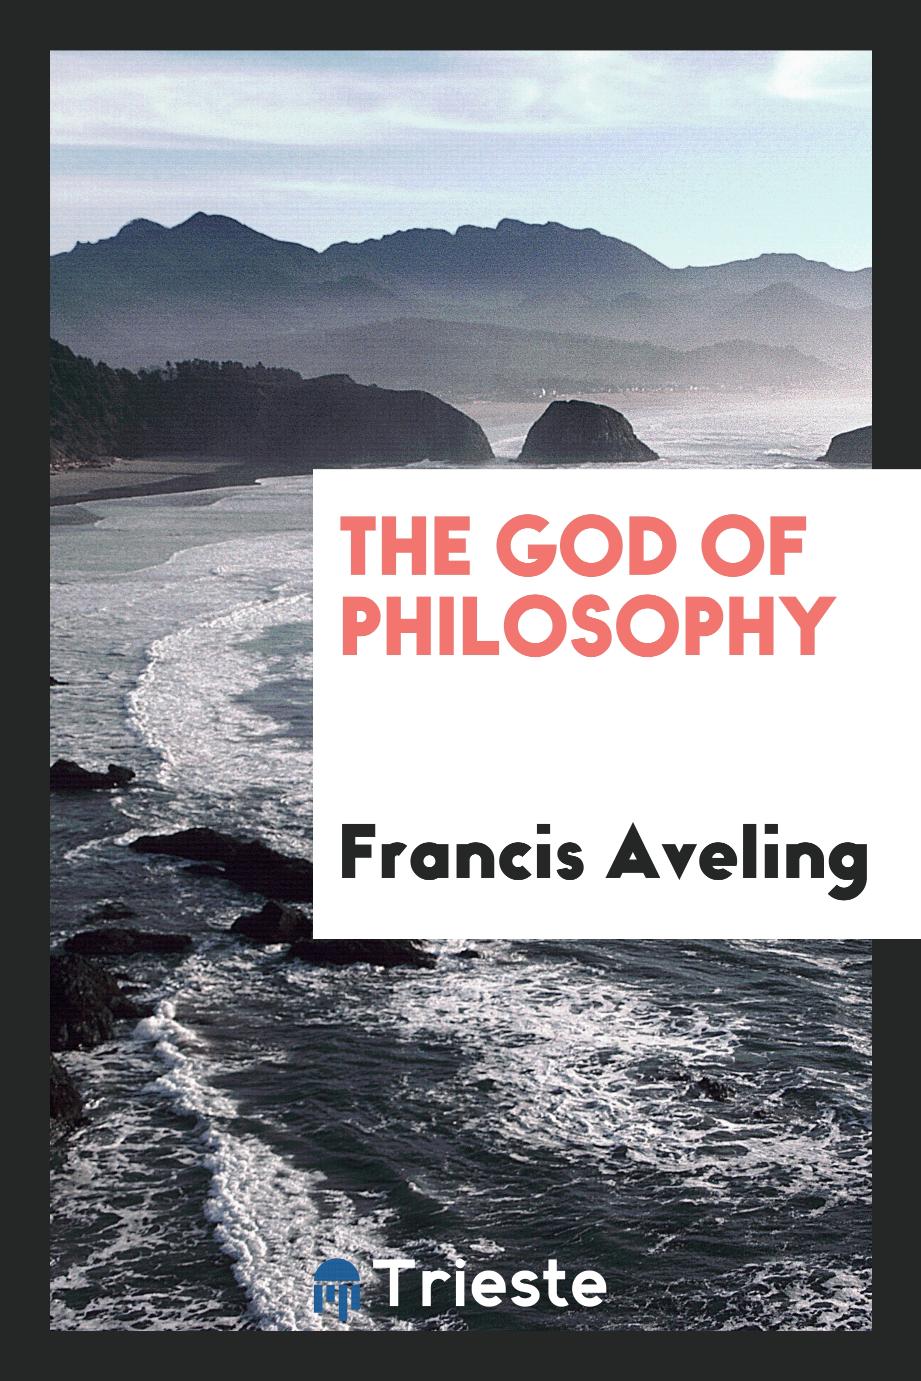 The God of philosophy